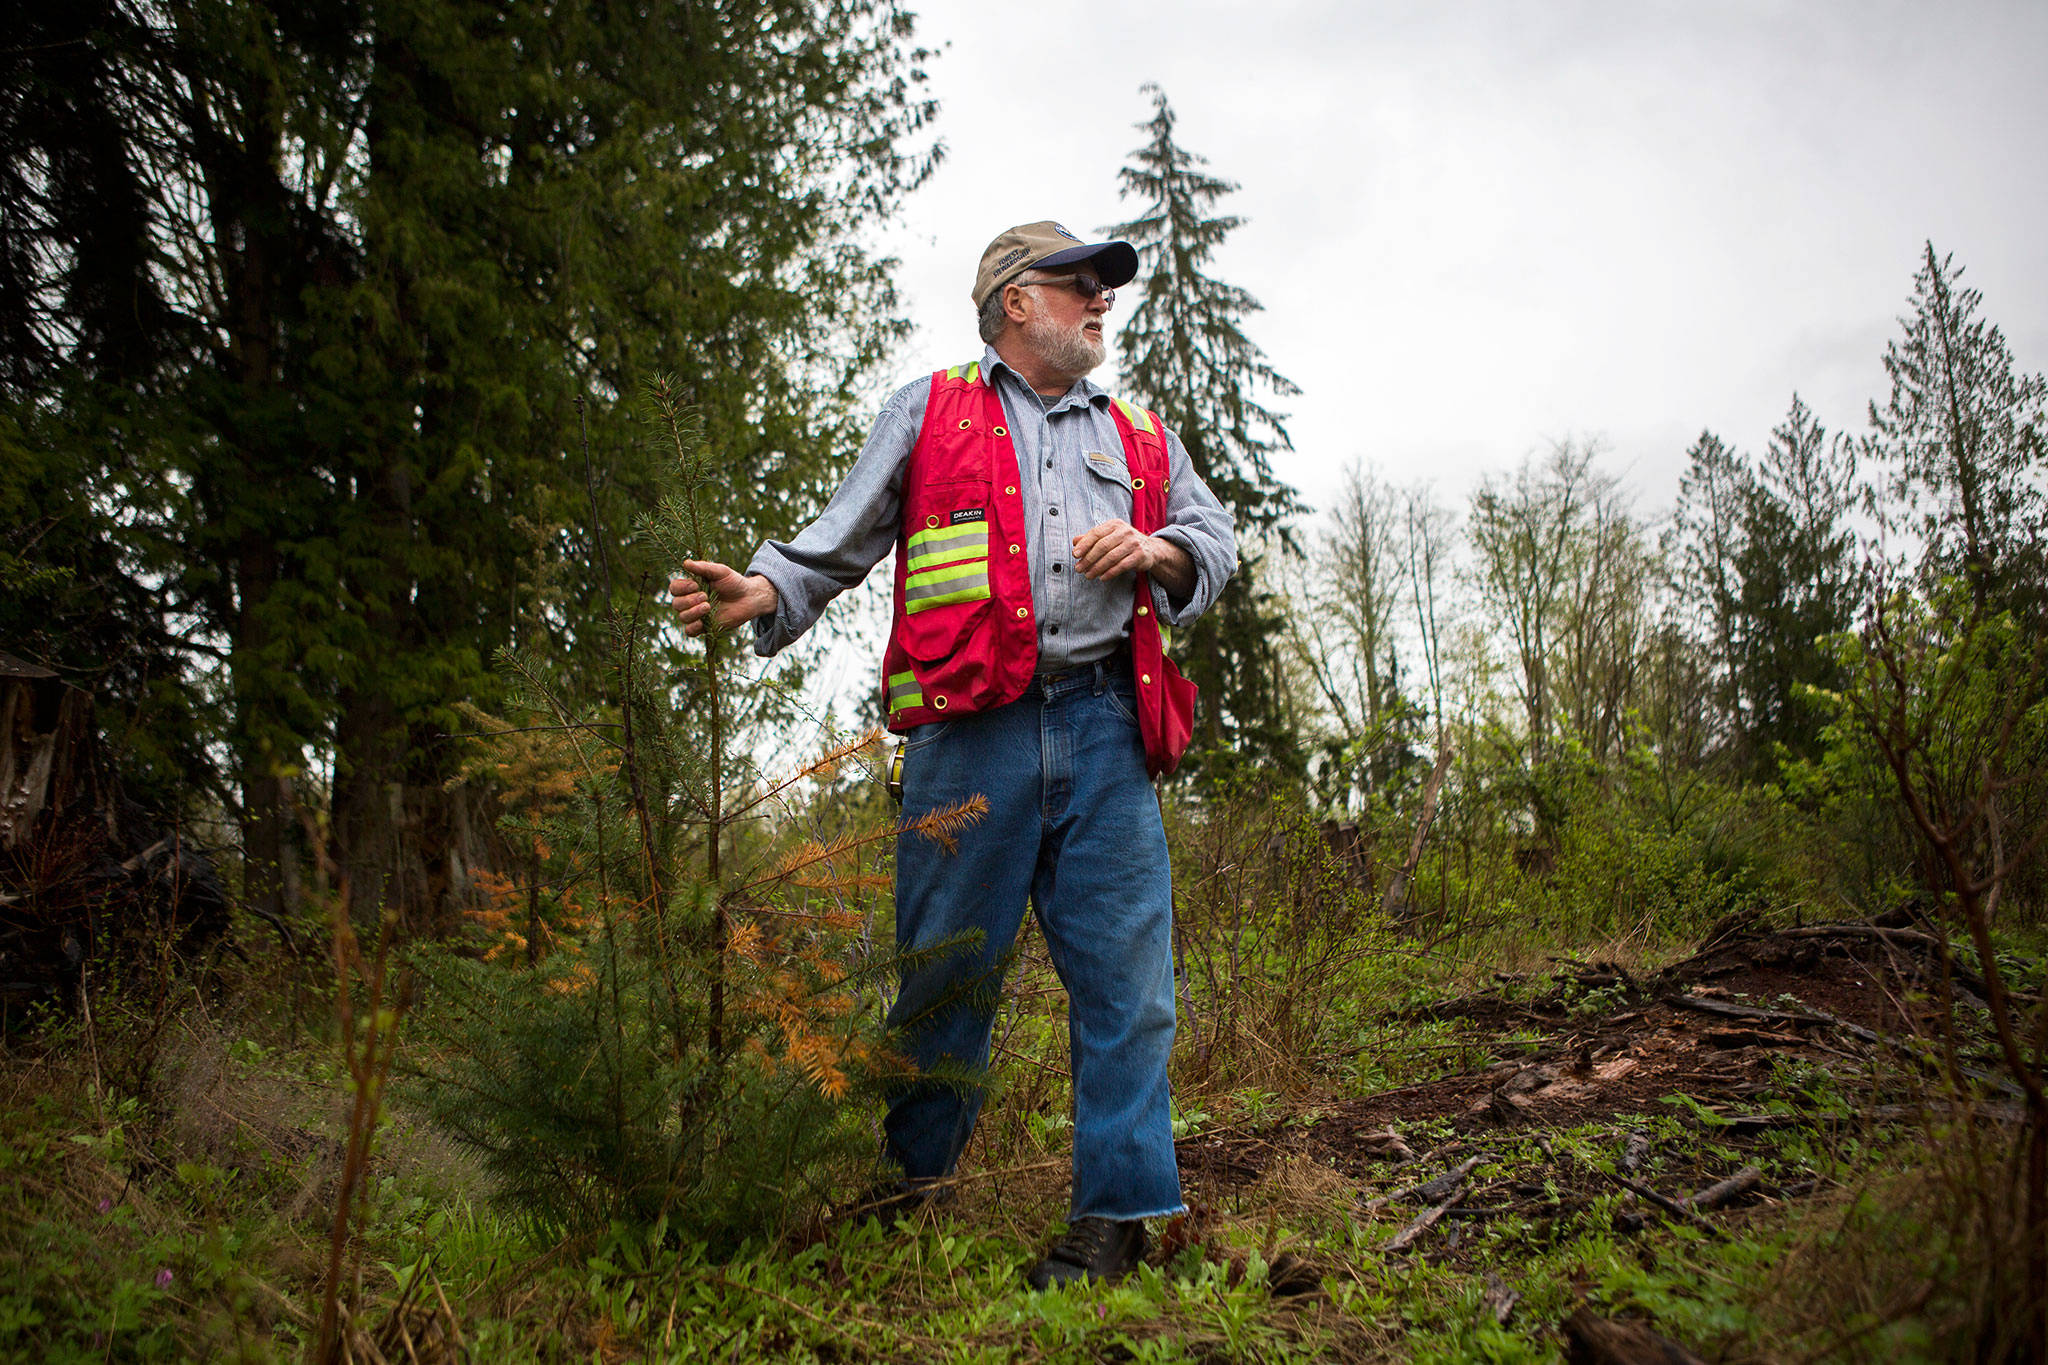 Boyd Norton looks for trees damaged by deer rubbing at the Nourse Tree Farm near Arlington on April 19. (Olivia Vanni / The Herald)